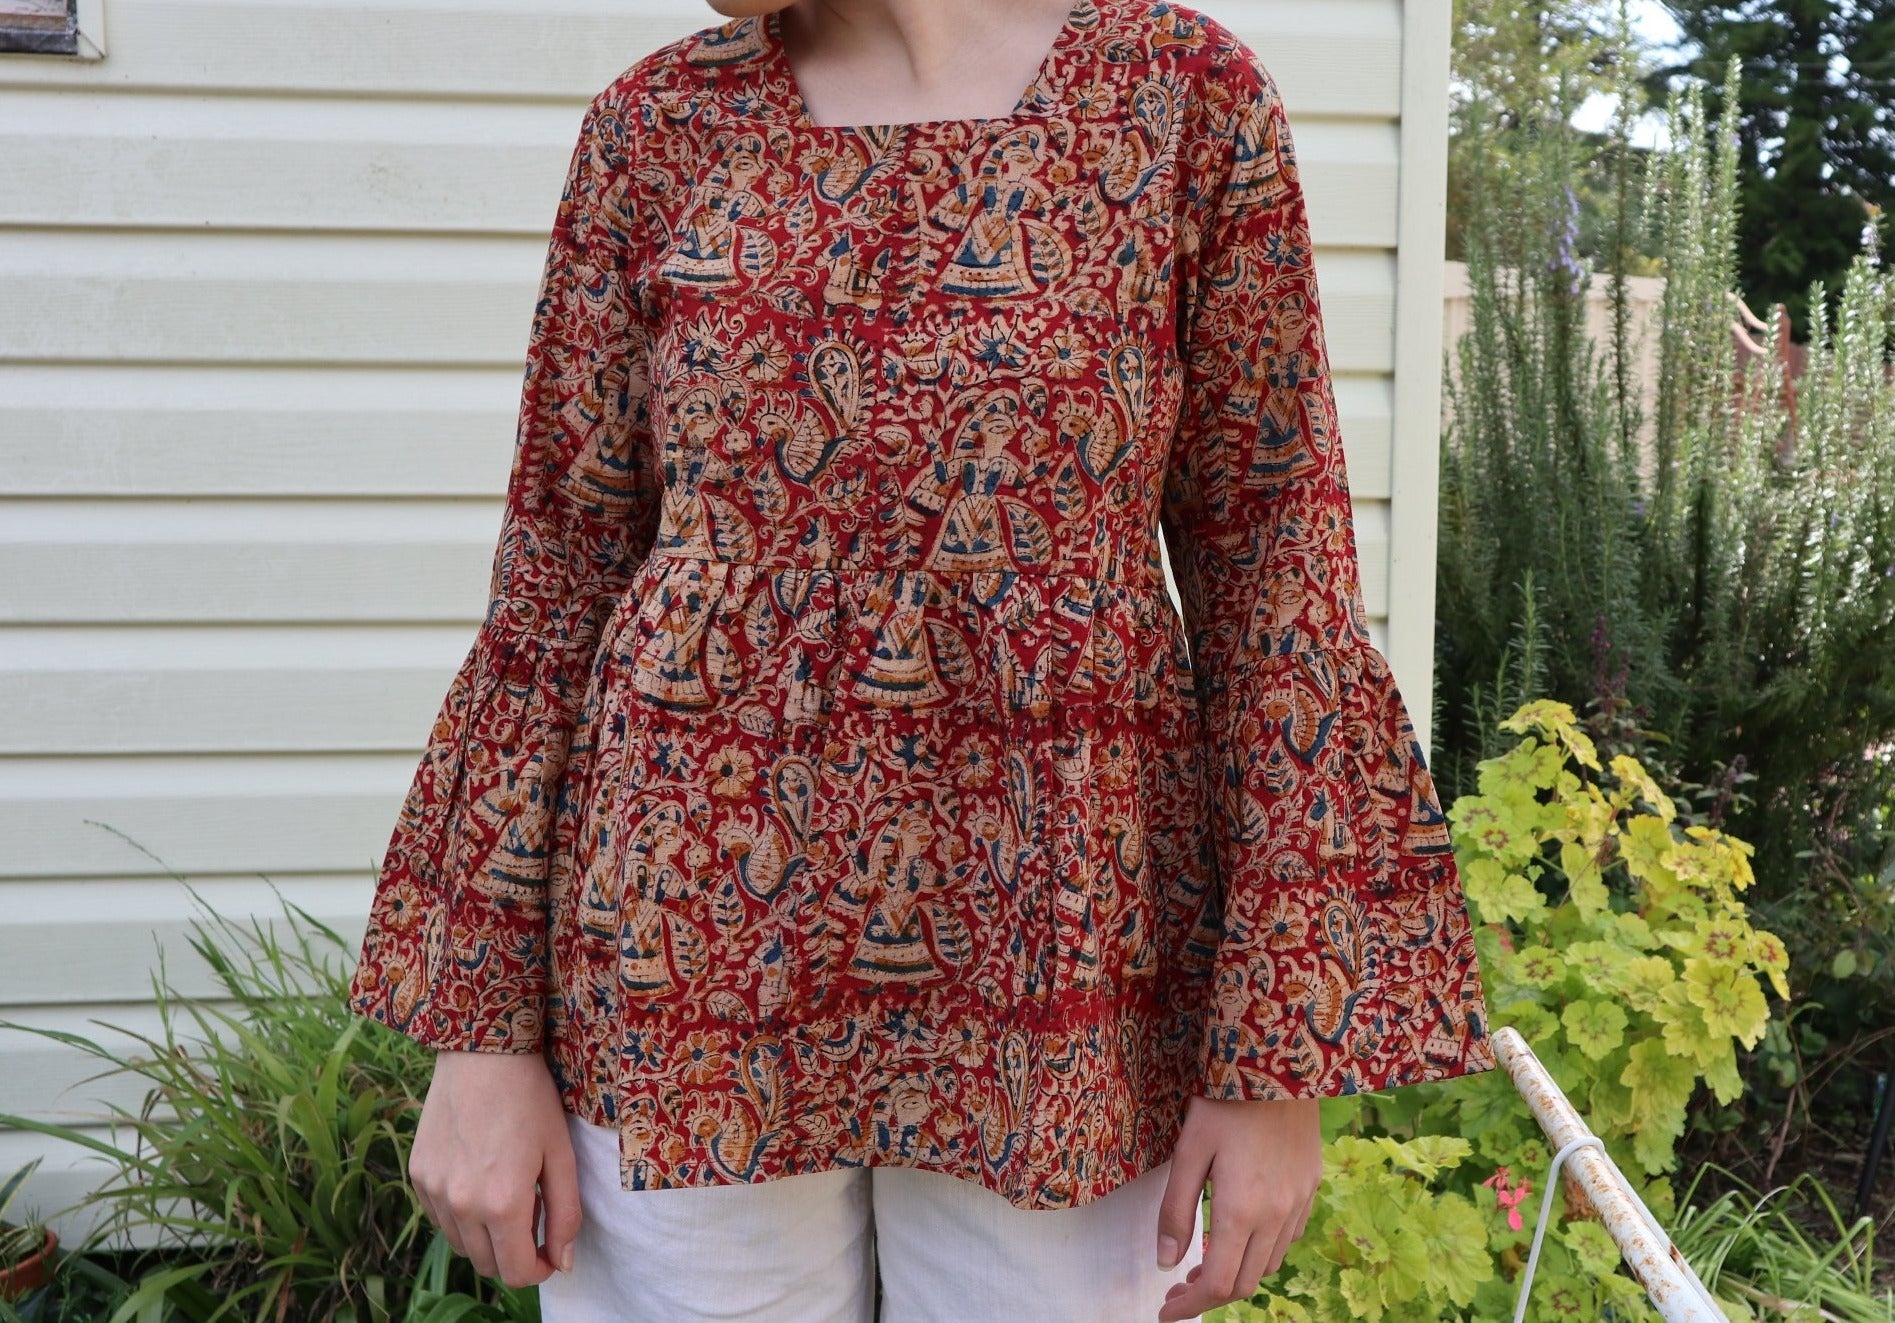 Fair trade ethical bell sleeve top with square neck. Red patterned design with traditional Indian Tanjore Art - women, birds, leaves and flowers are displayed